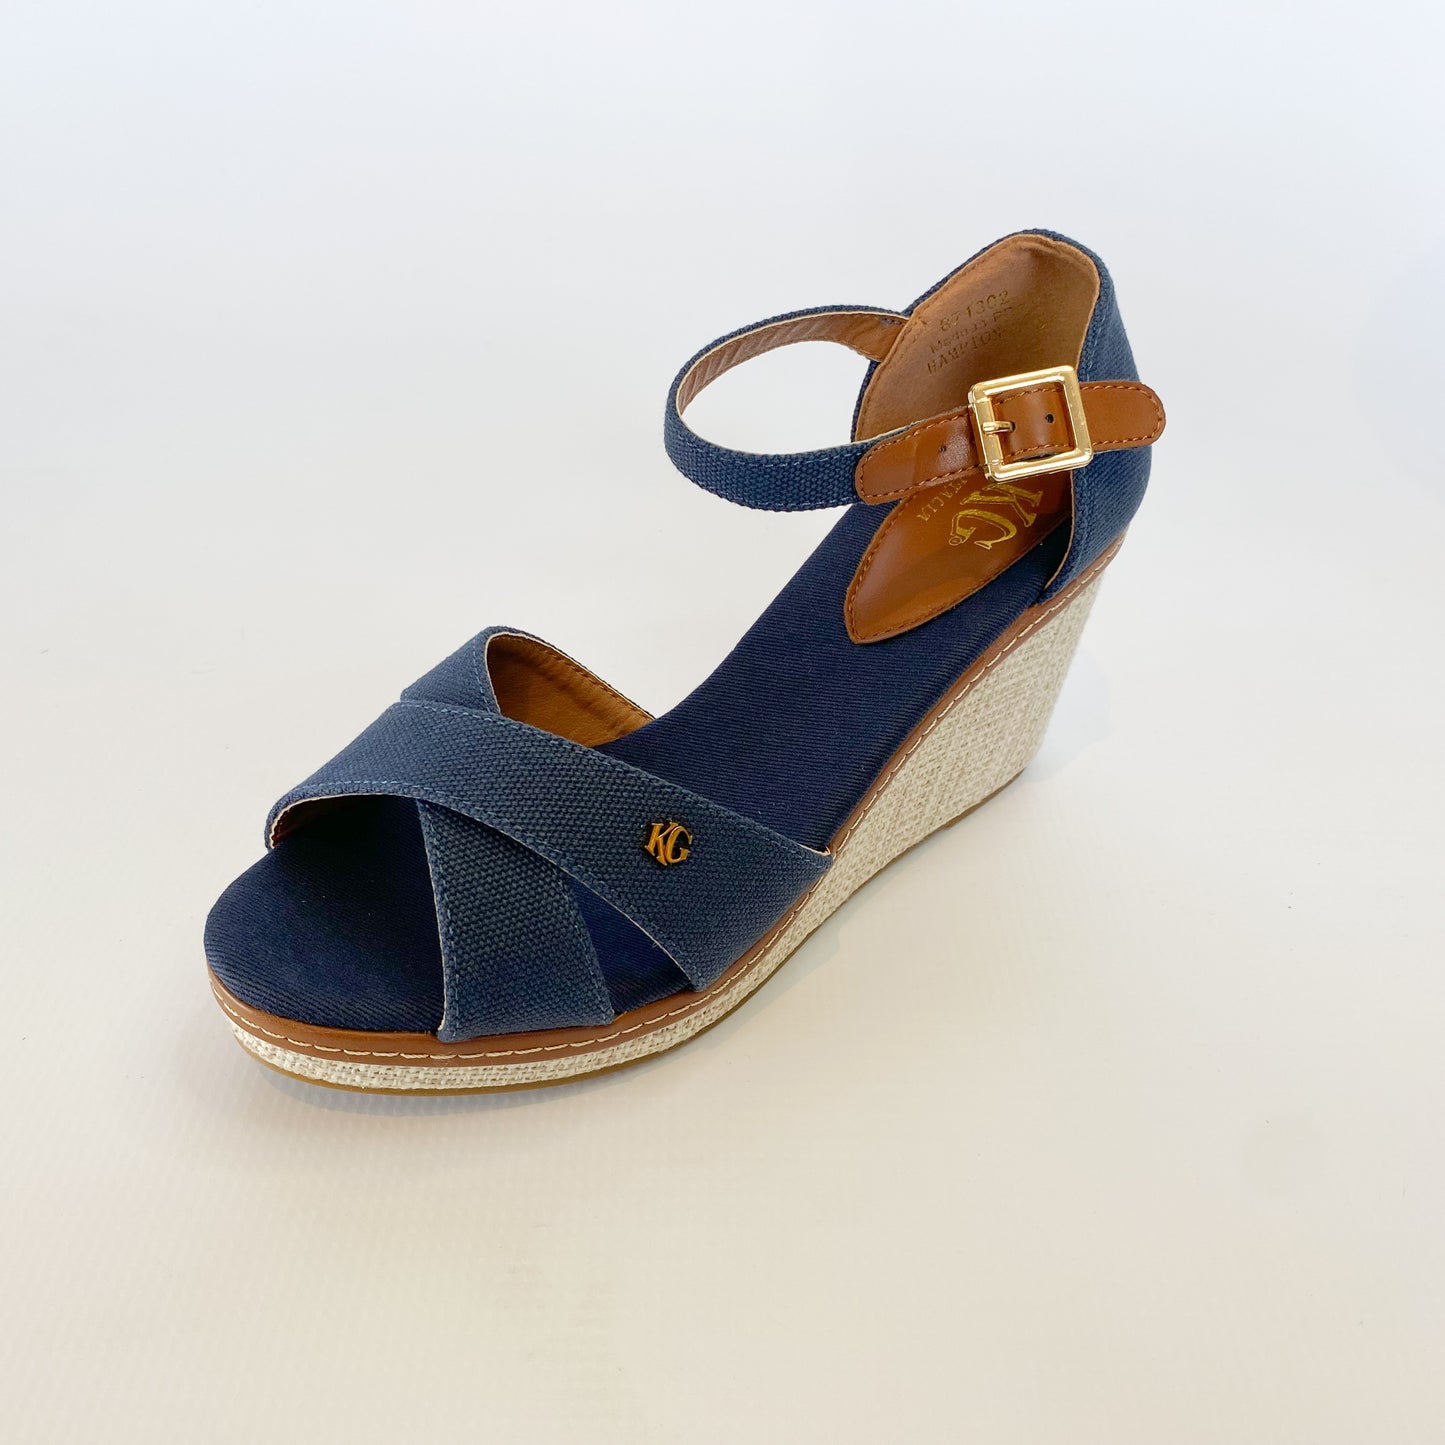 KG navy crossover strap canvas wedge